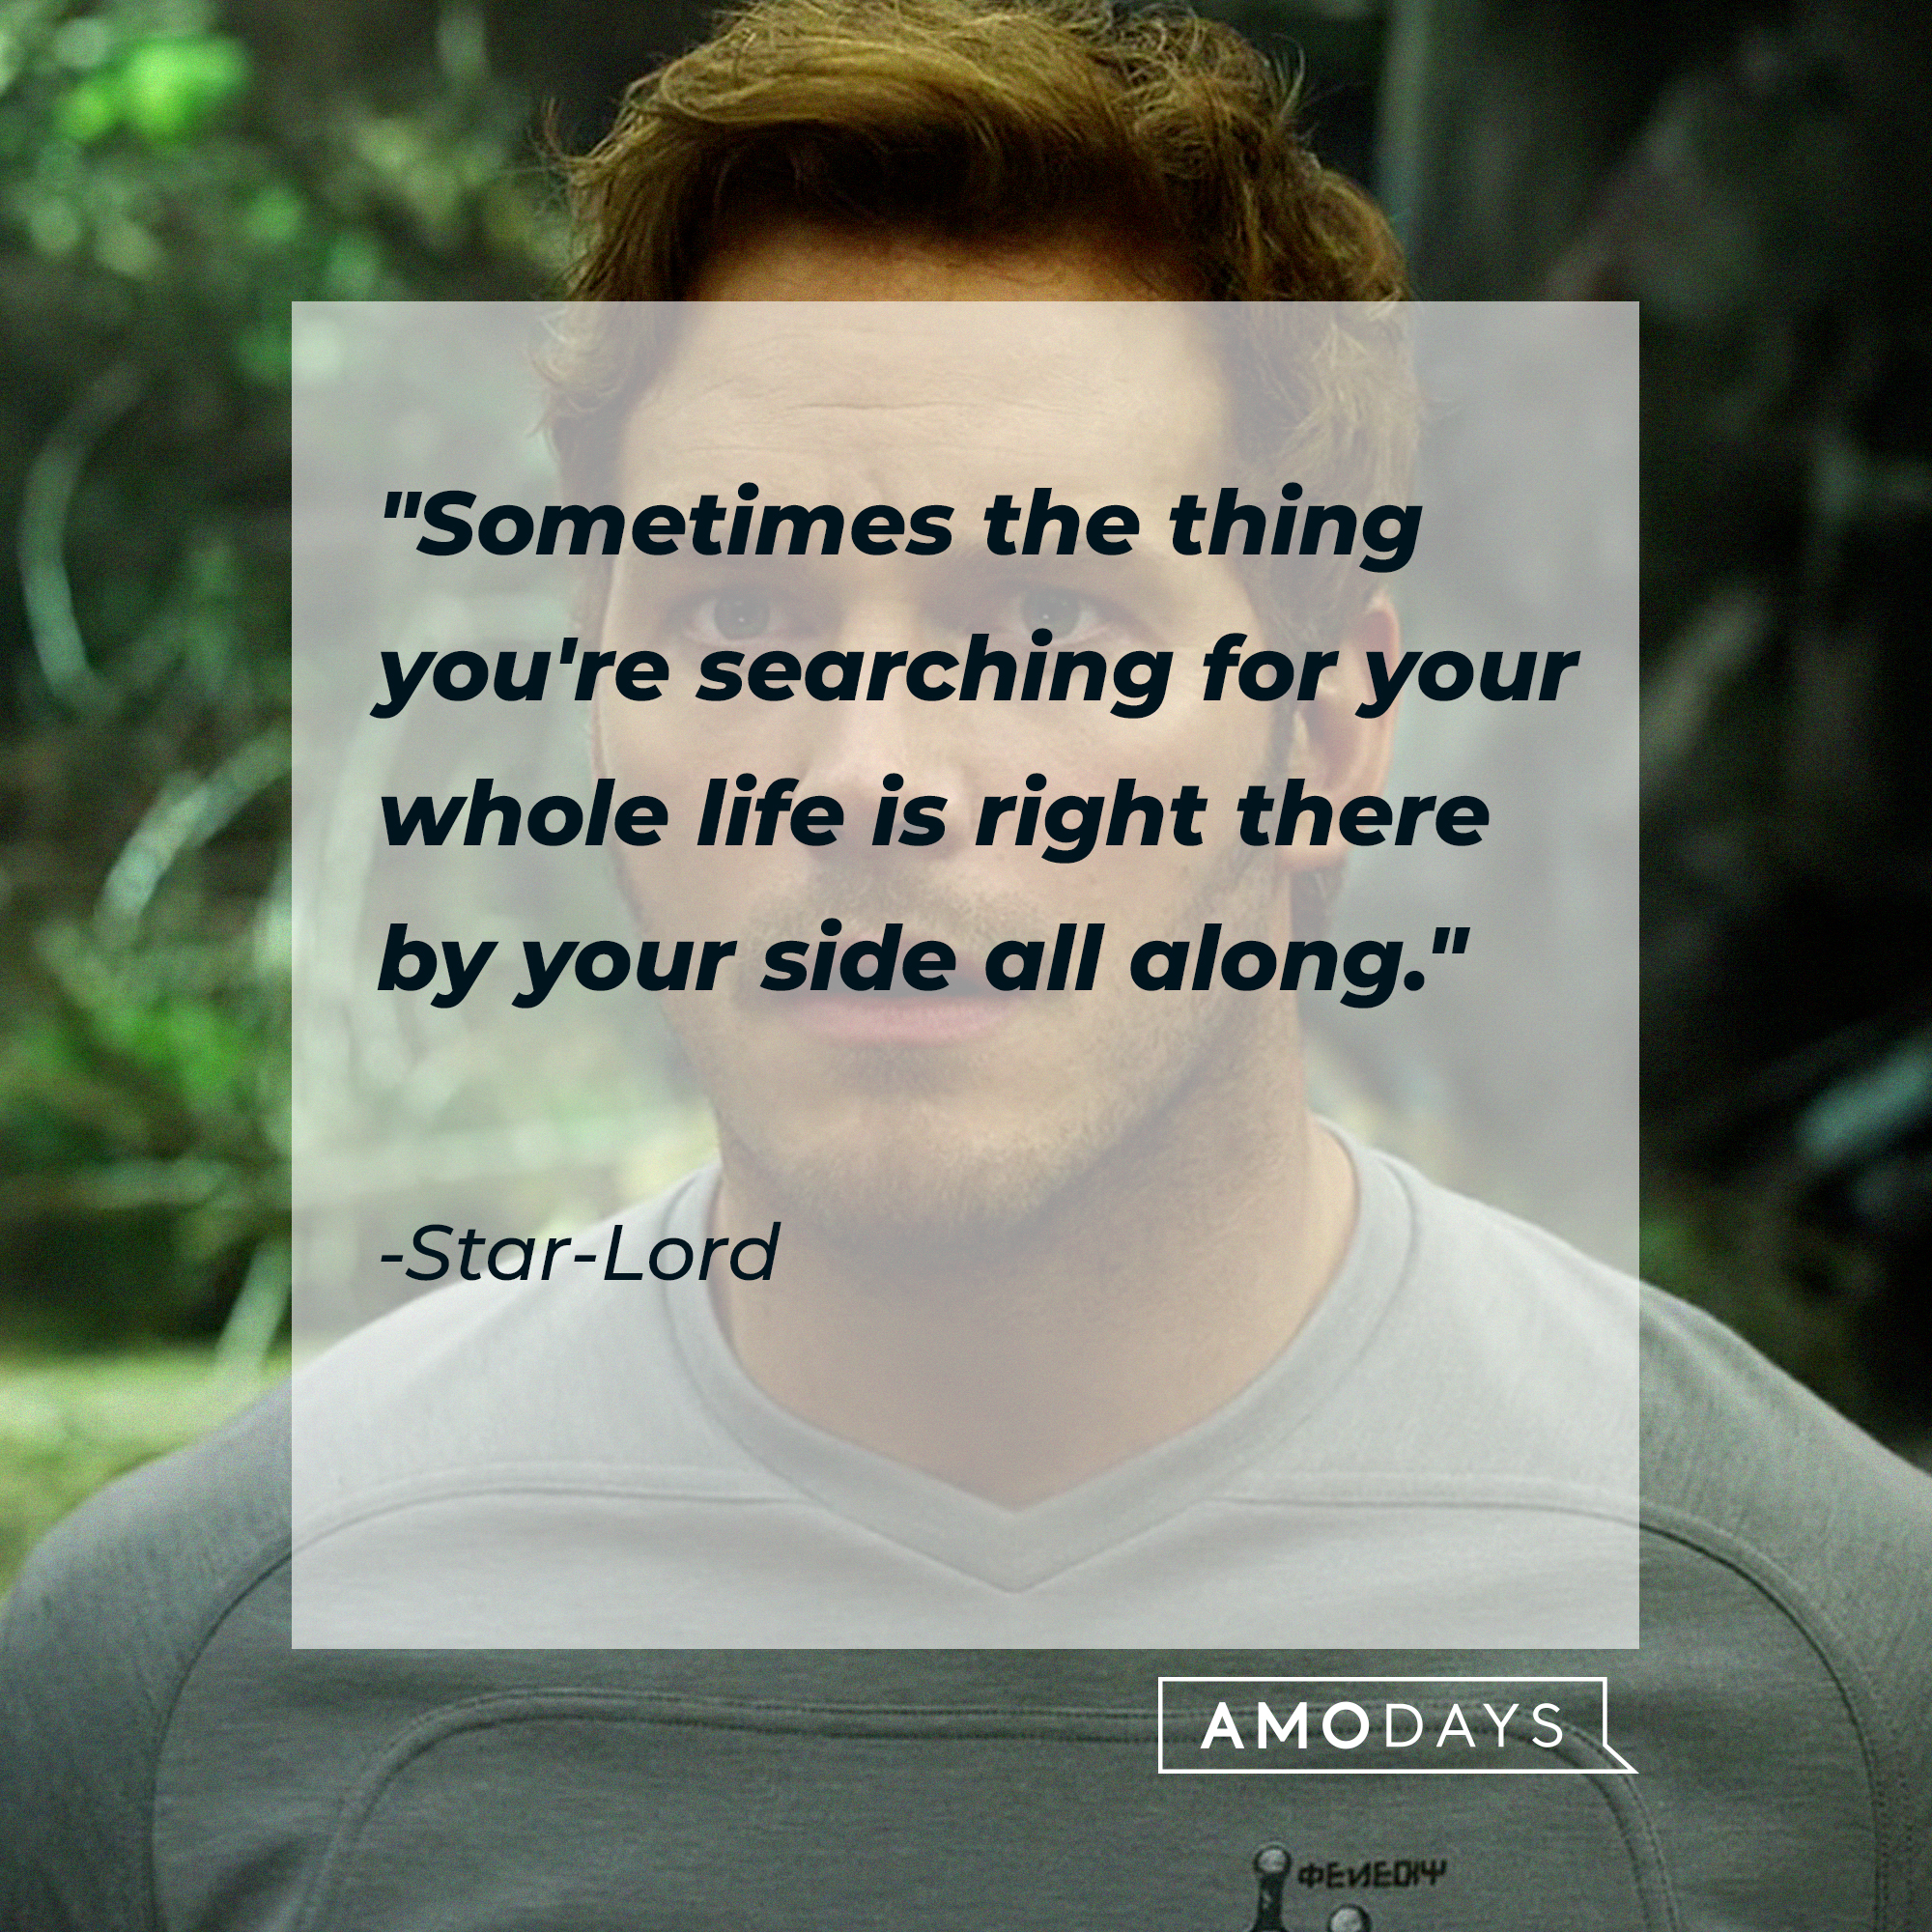 A photo of Star-Lord with his quote, "Sometimes the thing you're searching for your whole life is right there by your side all along." | Source: Facebook/guardiansofthegalaxy